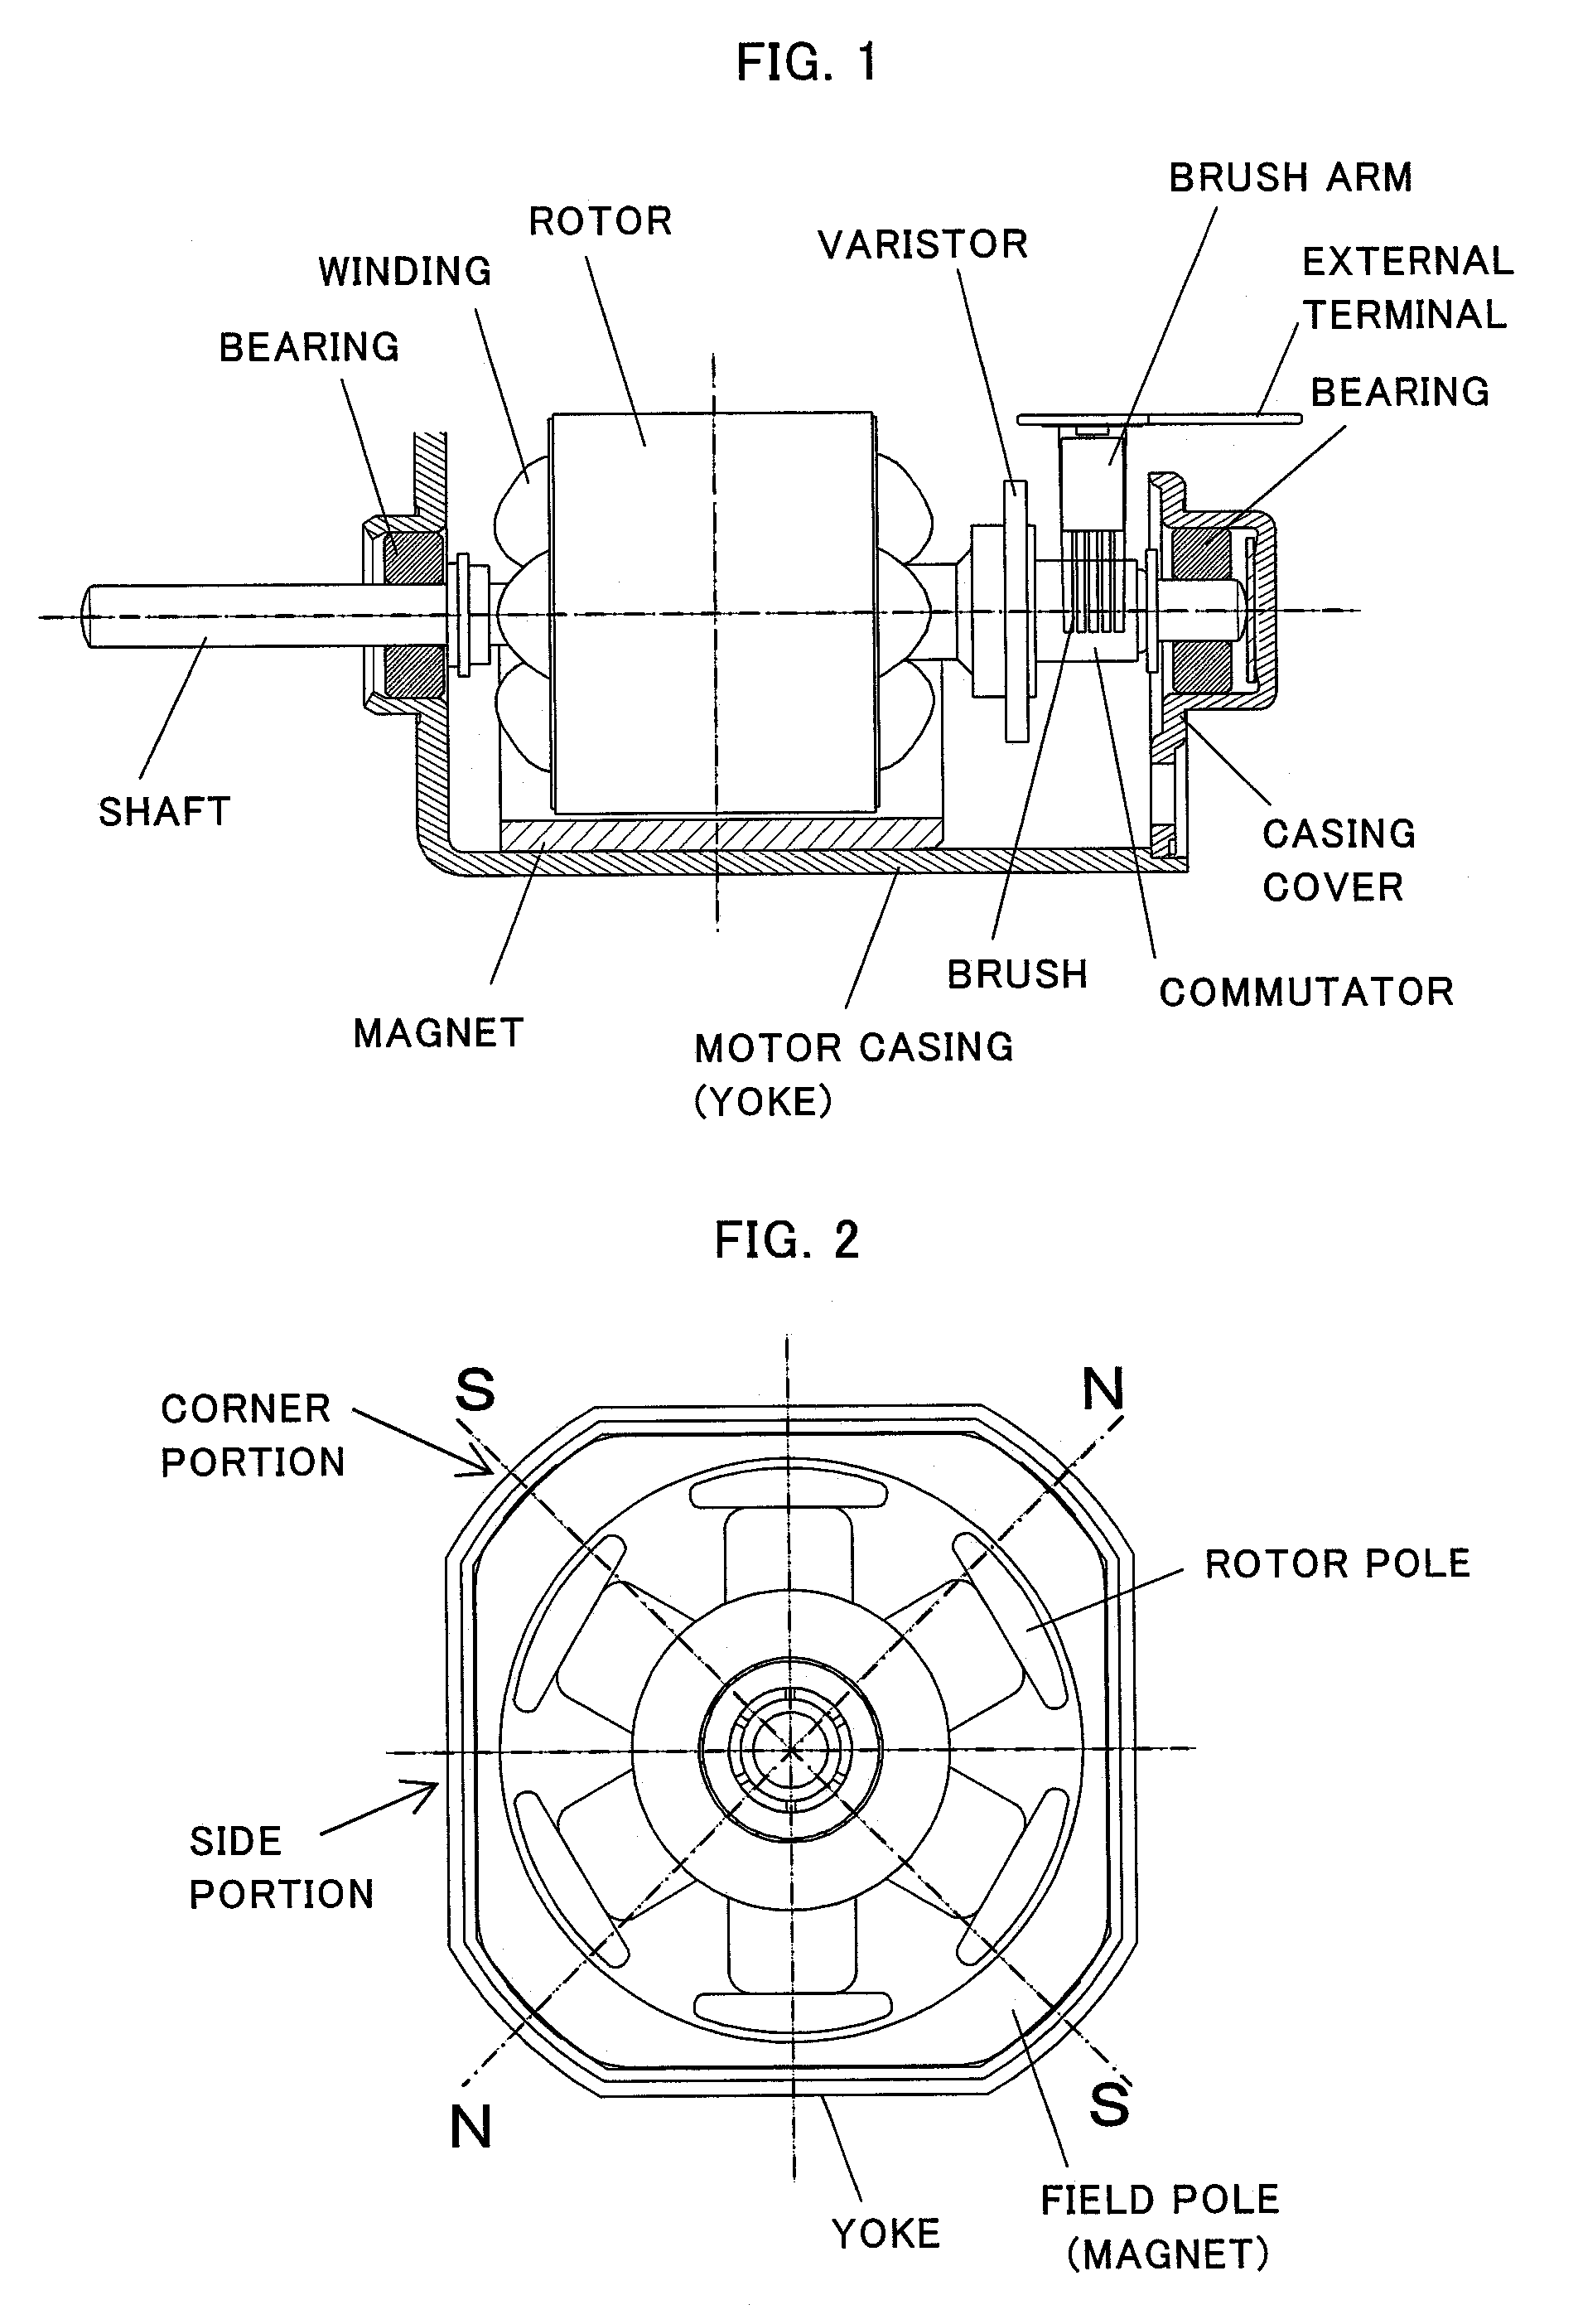 Small-sized motor having polygonal outer shape